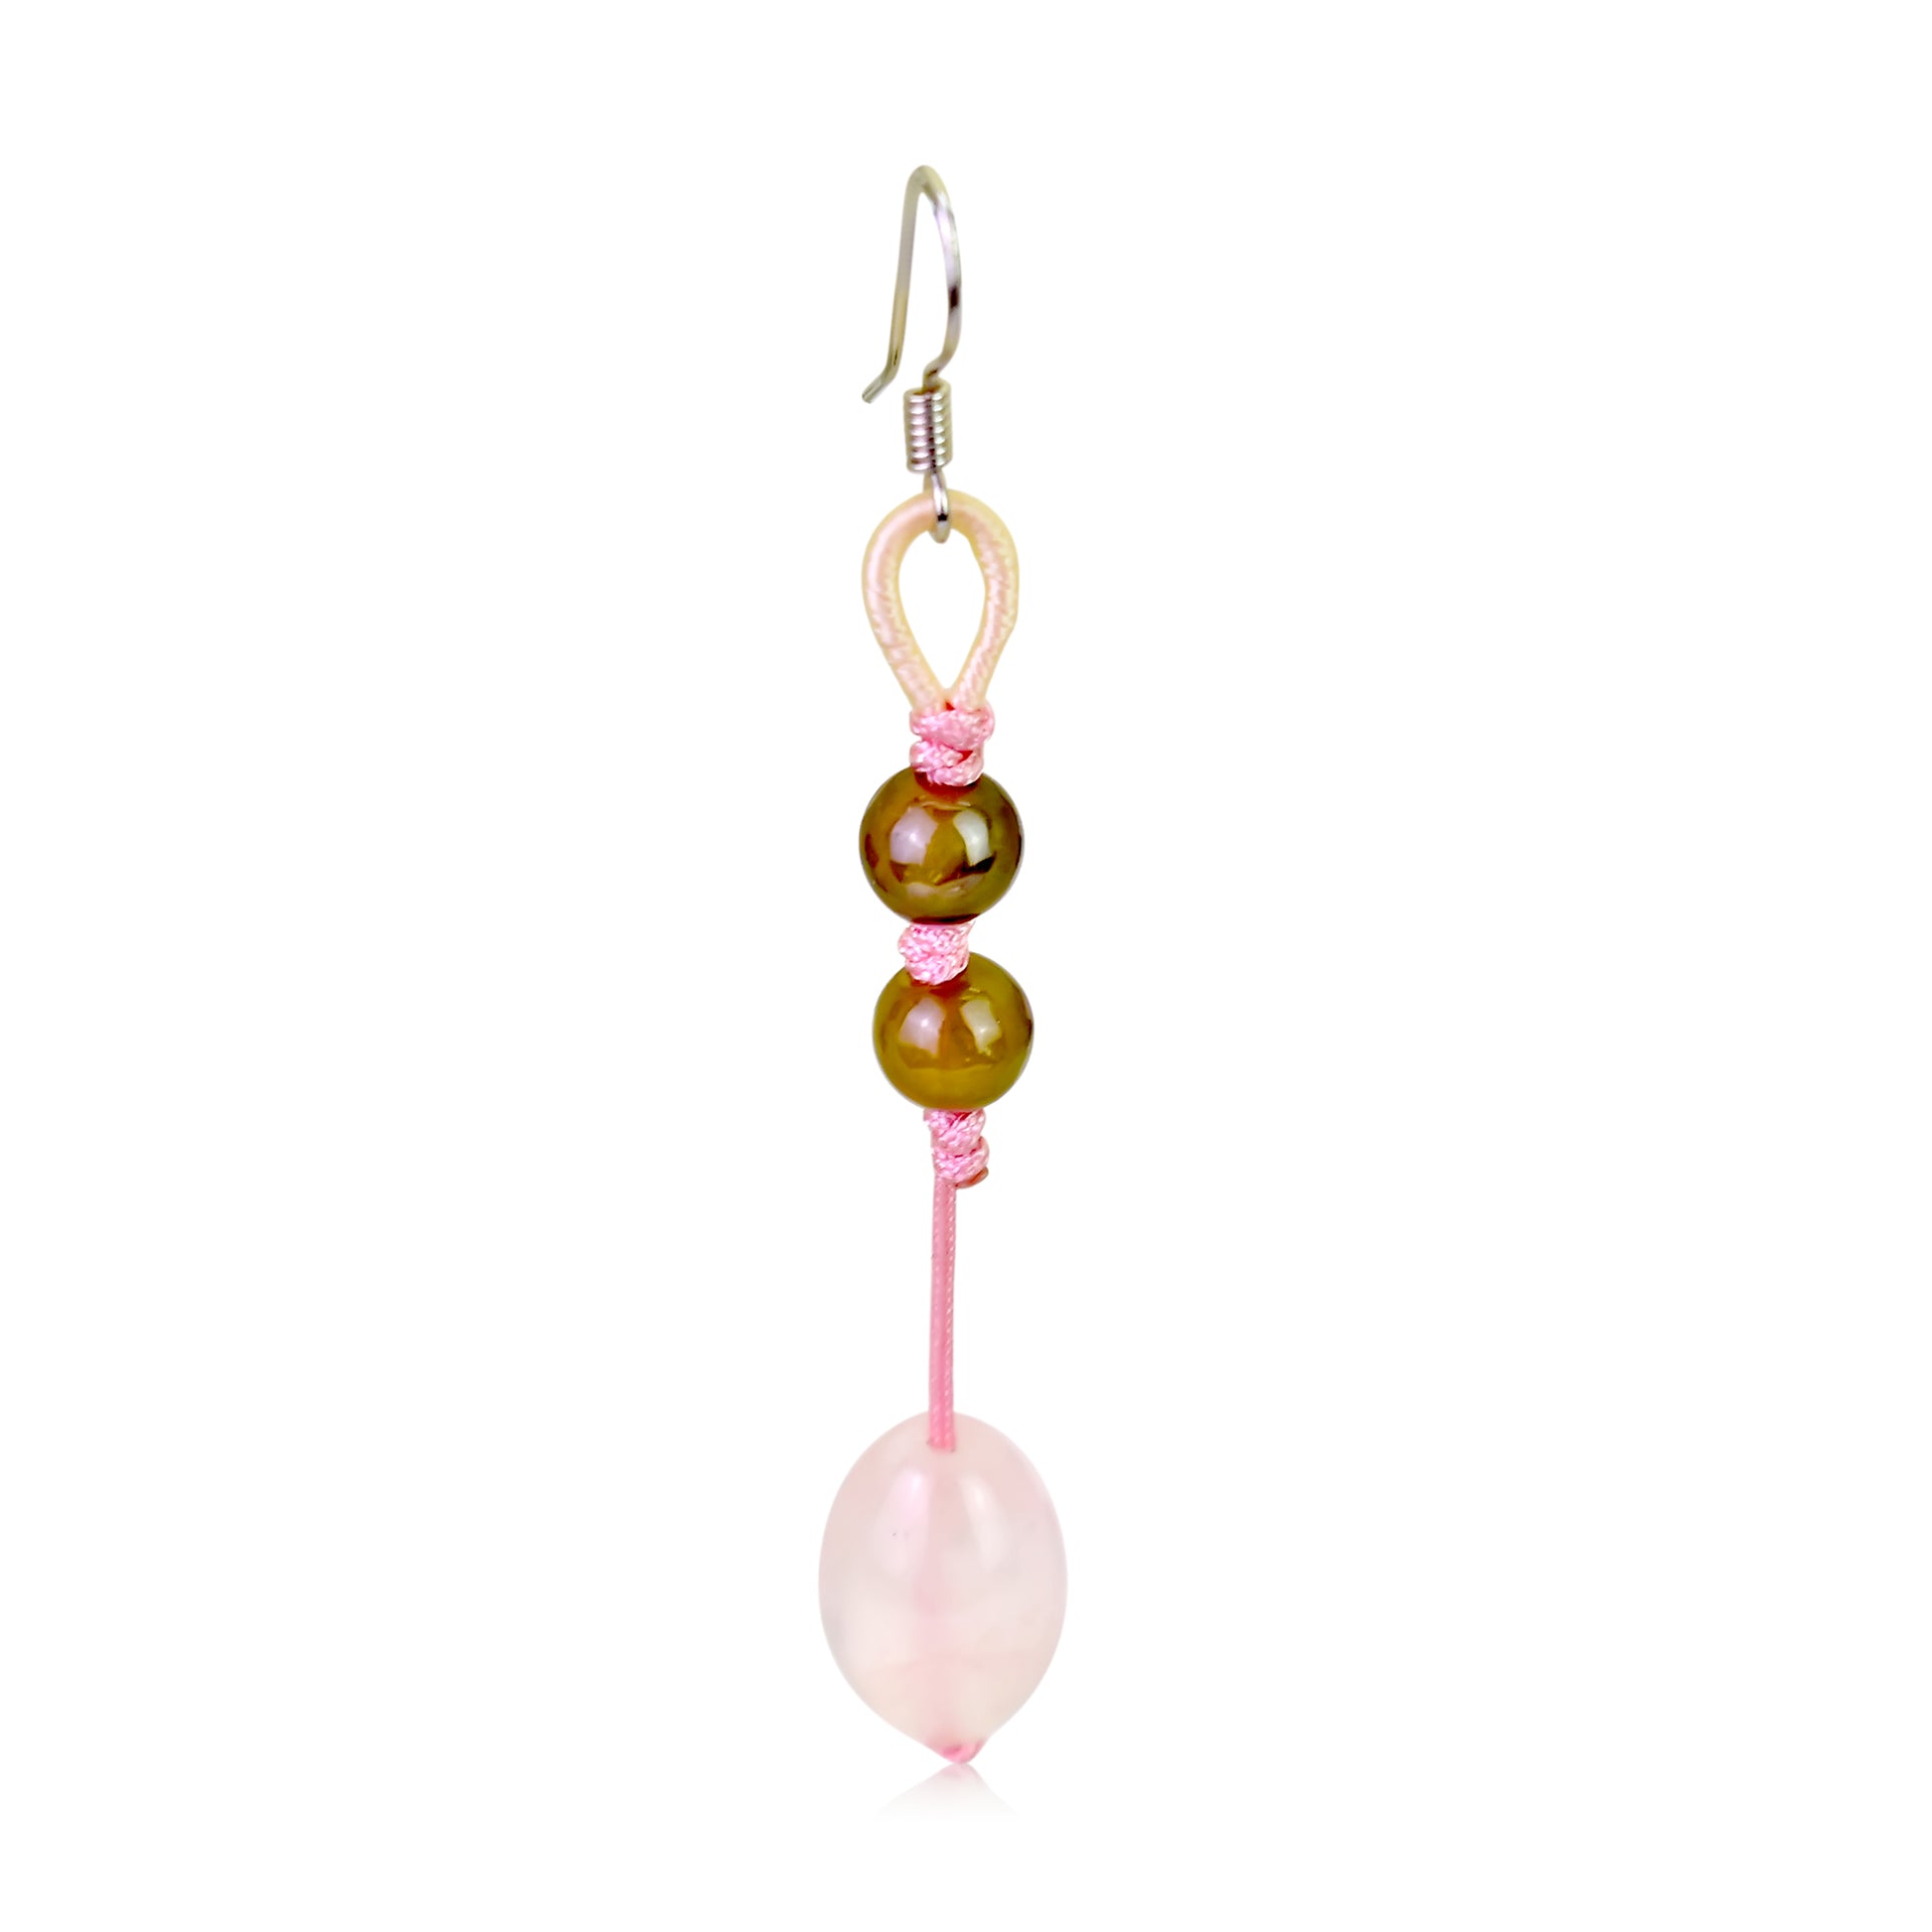 Get Classy with Oblong Rose Quartz Earrings made with Pink Cord